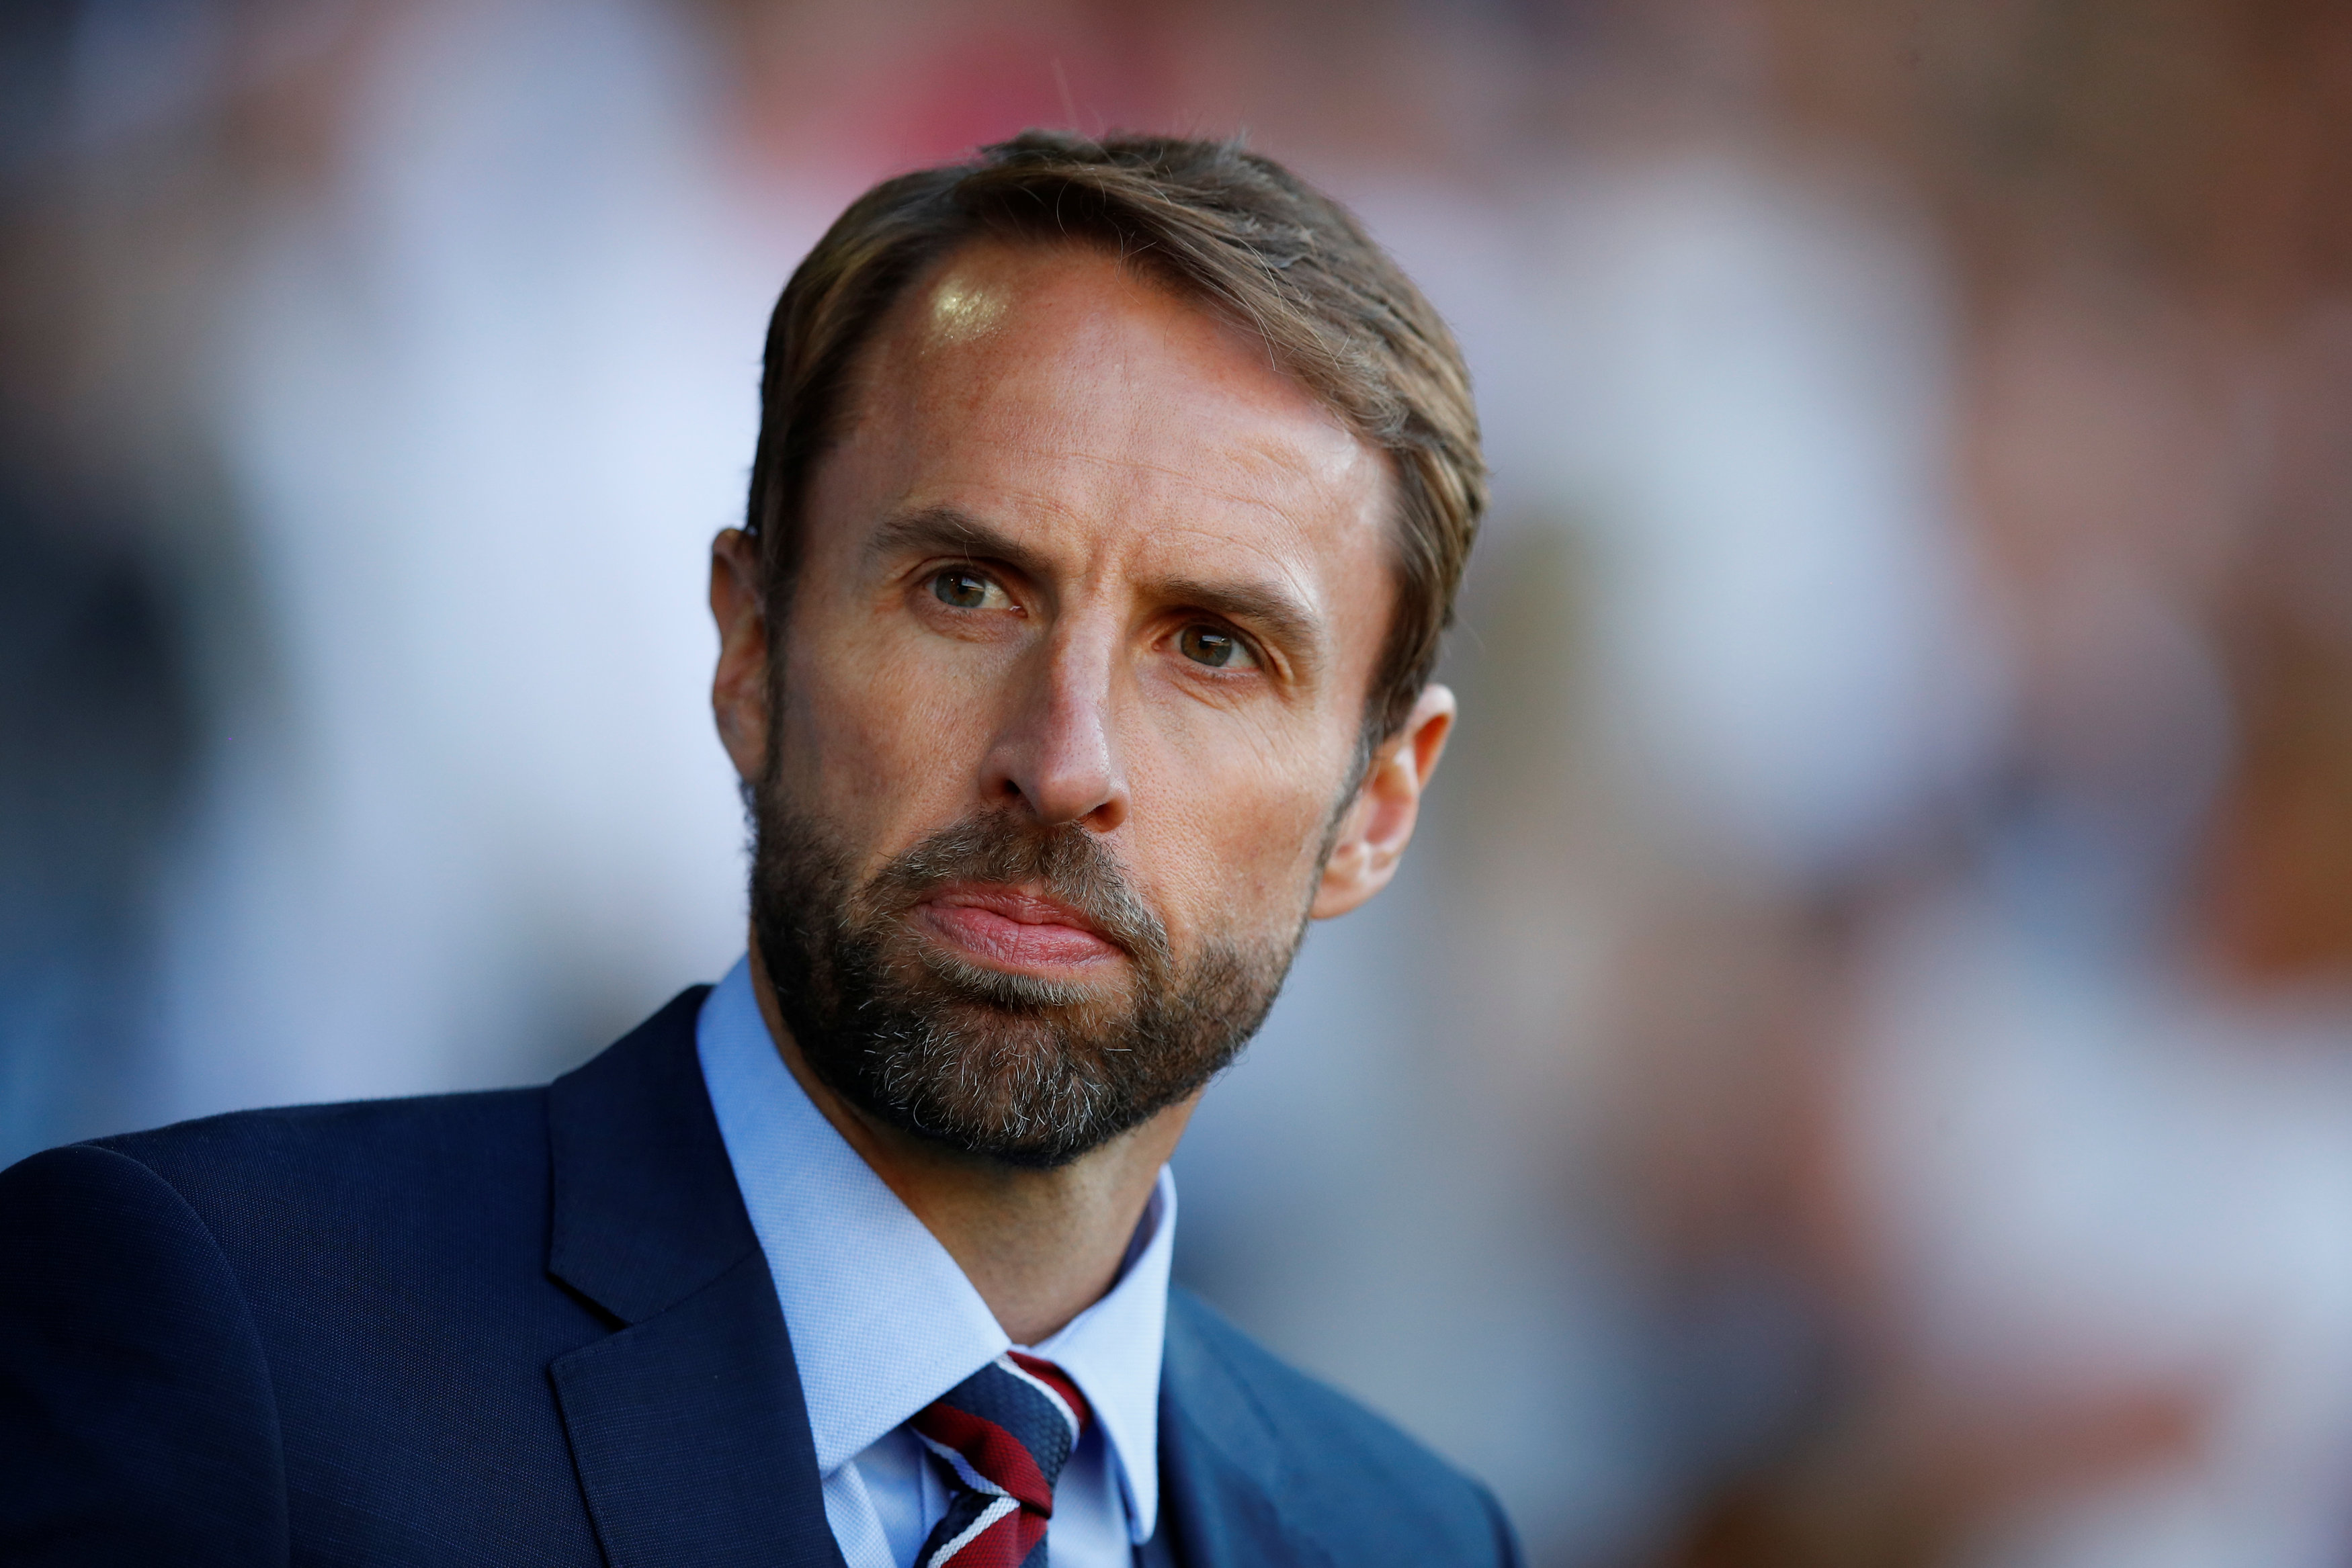 World Cup: England show quiet progress in bid to end years of hurt